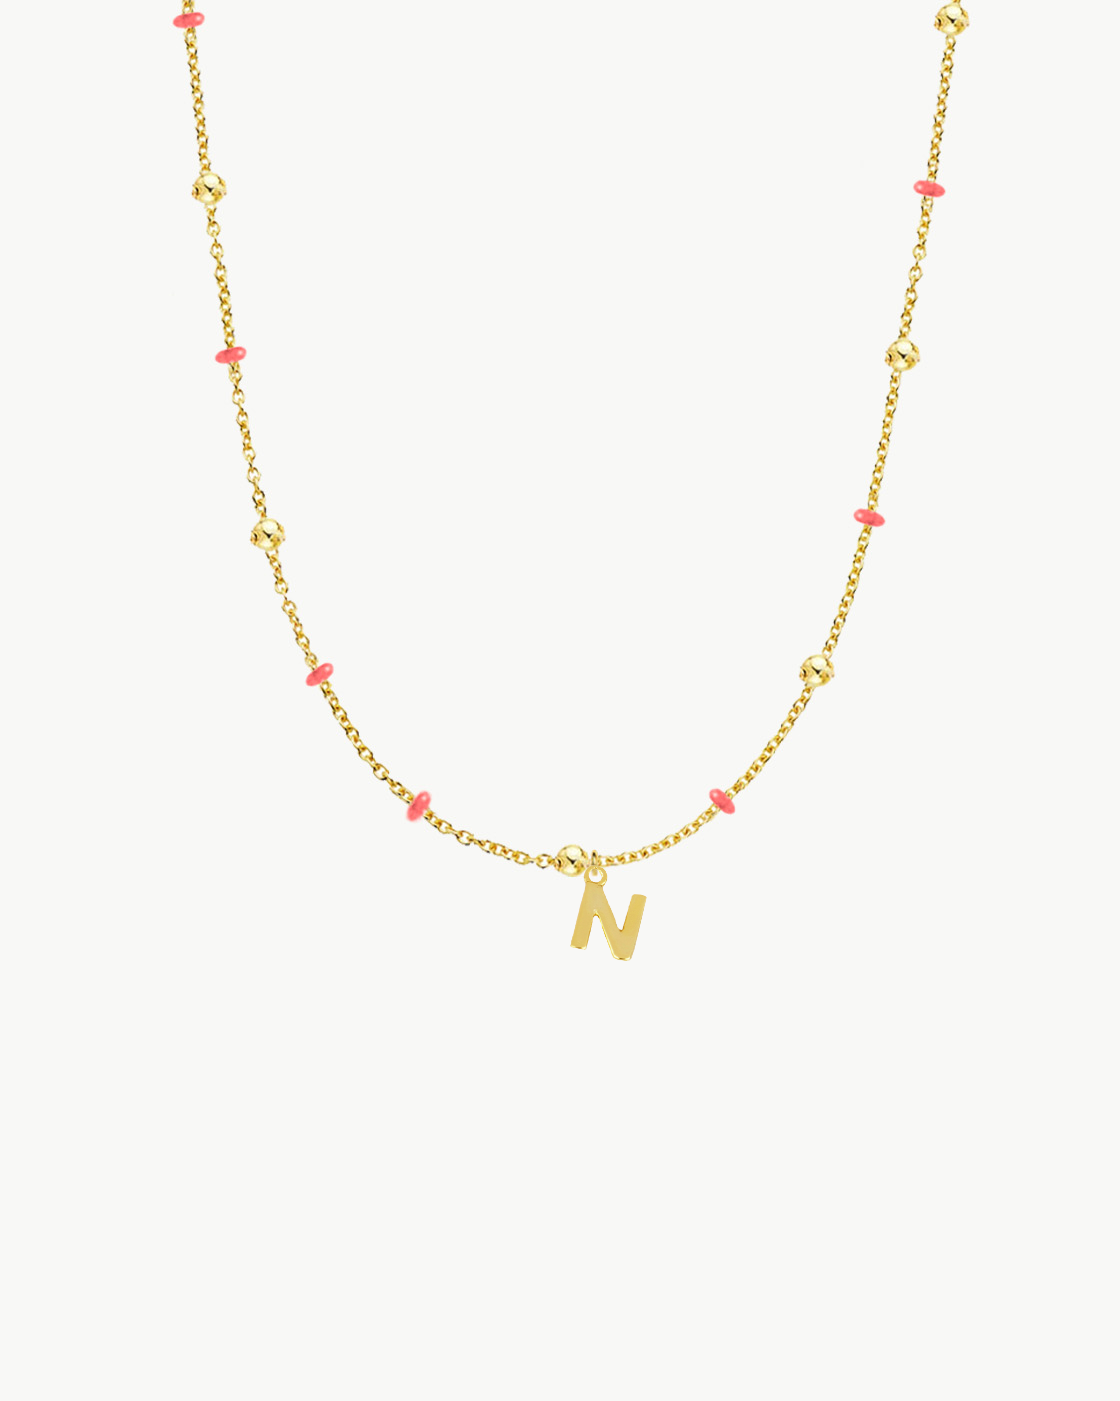 CORAL BALLS NECKLACE | INITIAL MINI GOLD